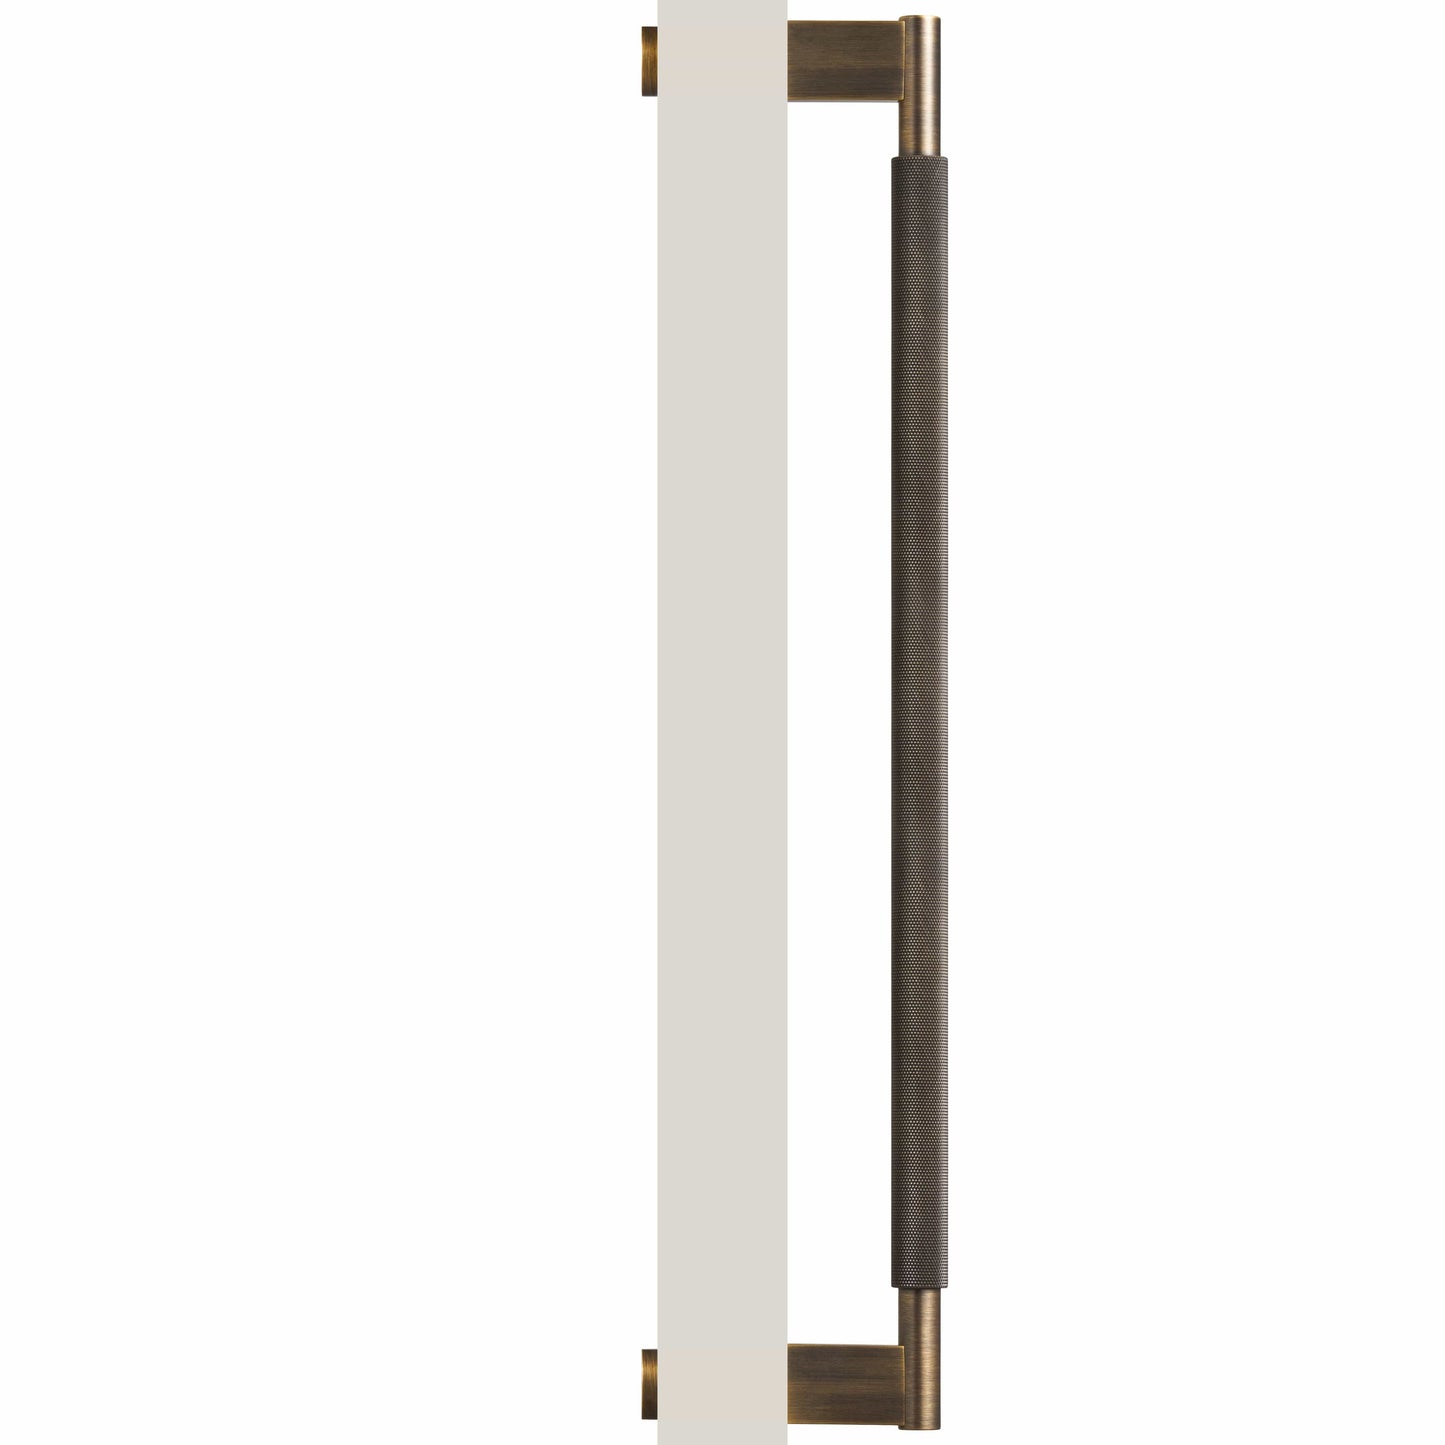 Bayside Luxe - Single Sided Solid Antique Brass Door Pull  - Bronte 450 x 55mm (HS418mm)